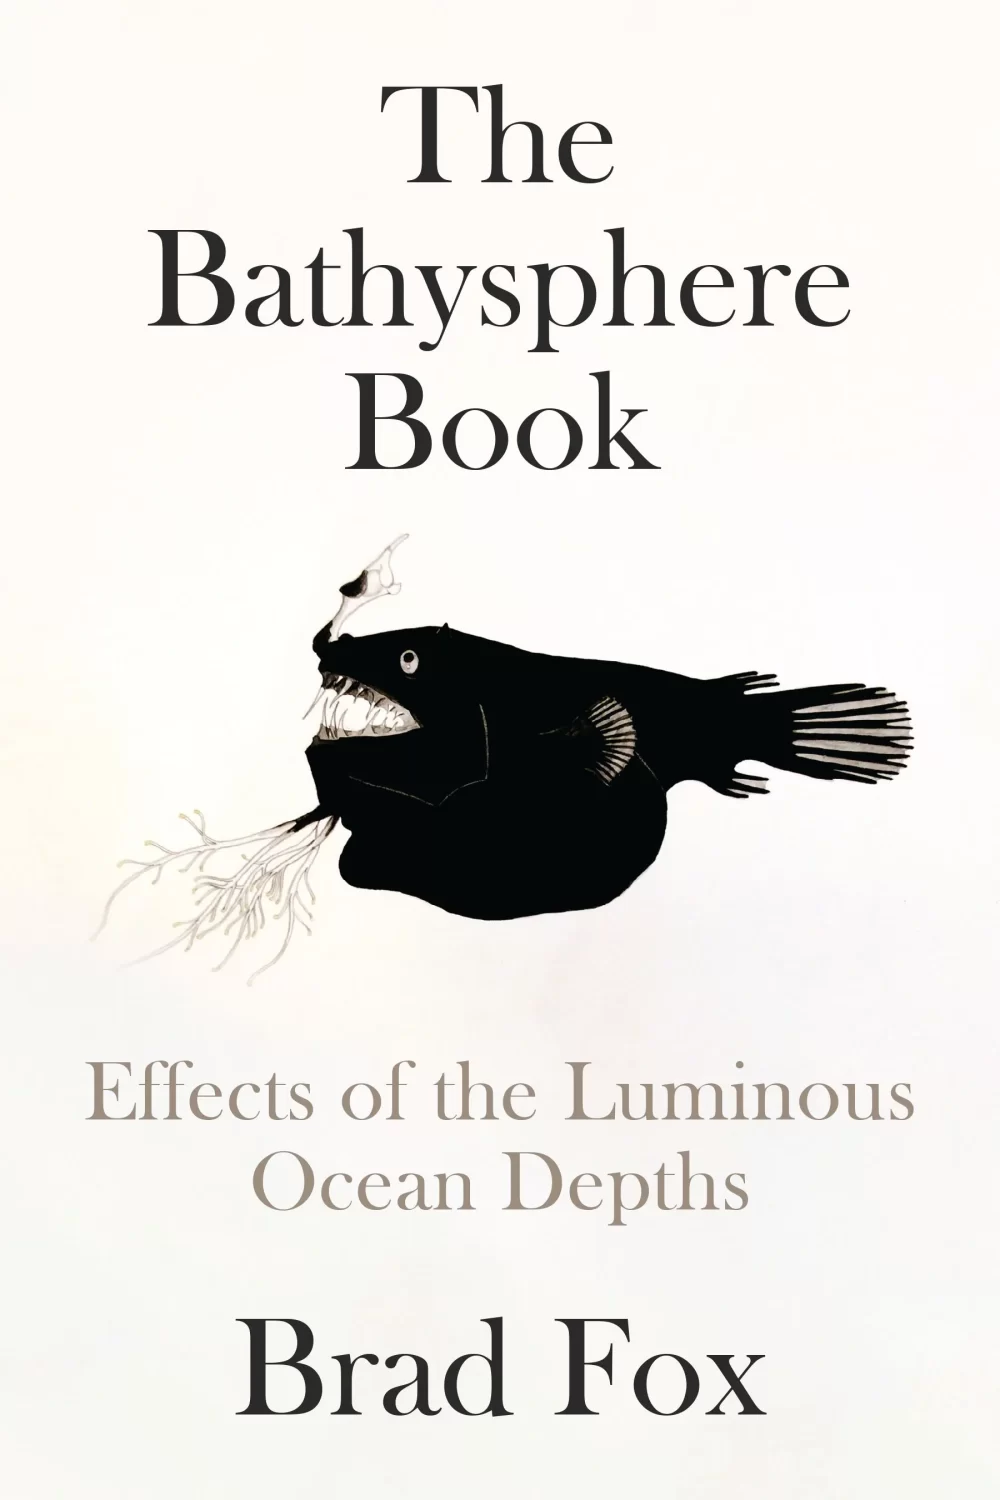 The Bathysphere Book: Effects of the Luminous Ocean Depths book cover, with a black puffer fish drawn in pen-and-ink style.